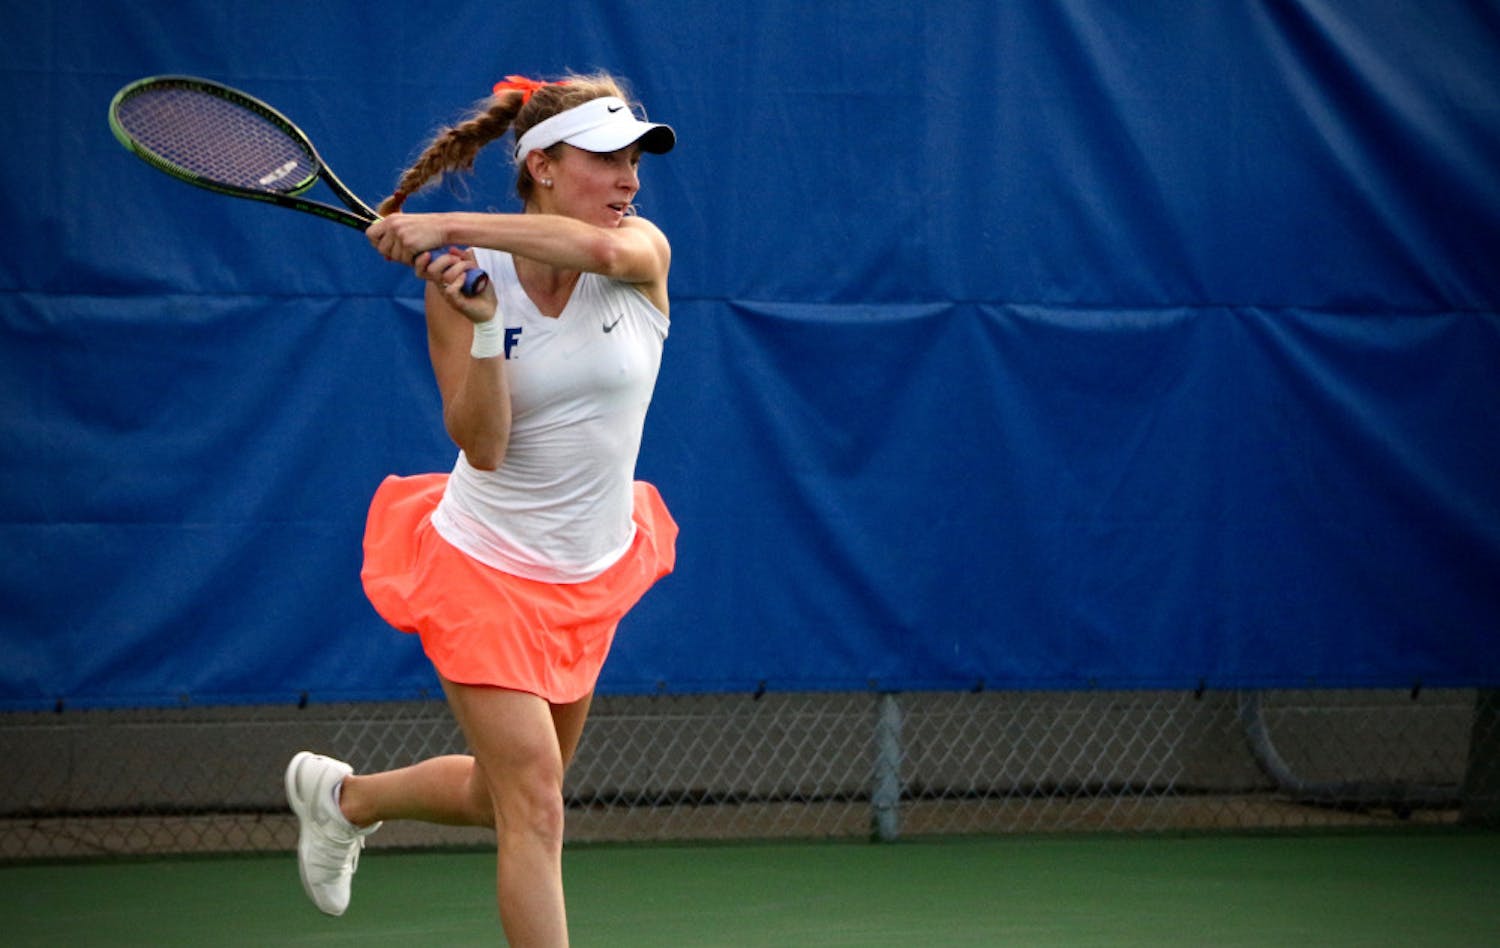 Senior Josie Kuhlman was the first to win her singles match of the day and helped her team earn a spot at the ITA Division I Women’s Team Indoor Championships in February. 